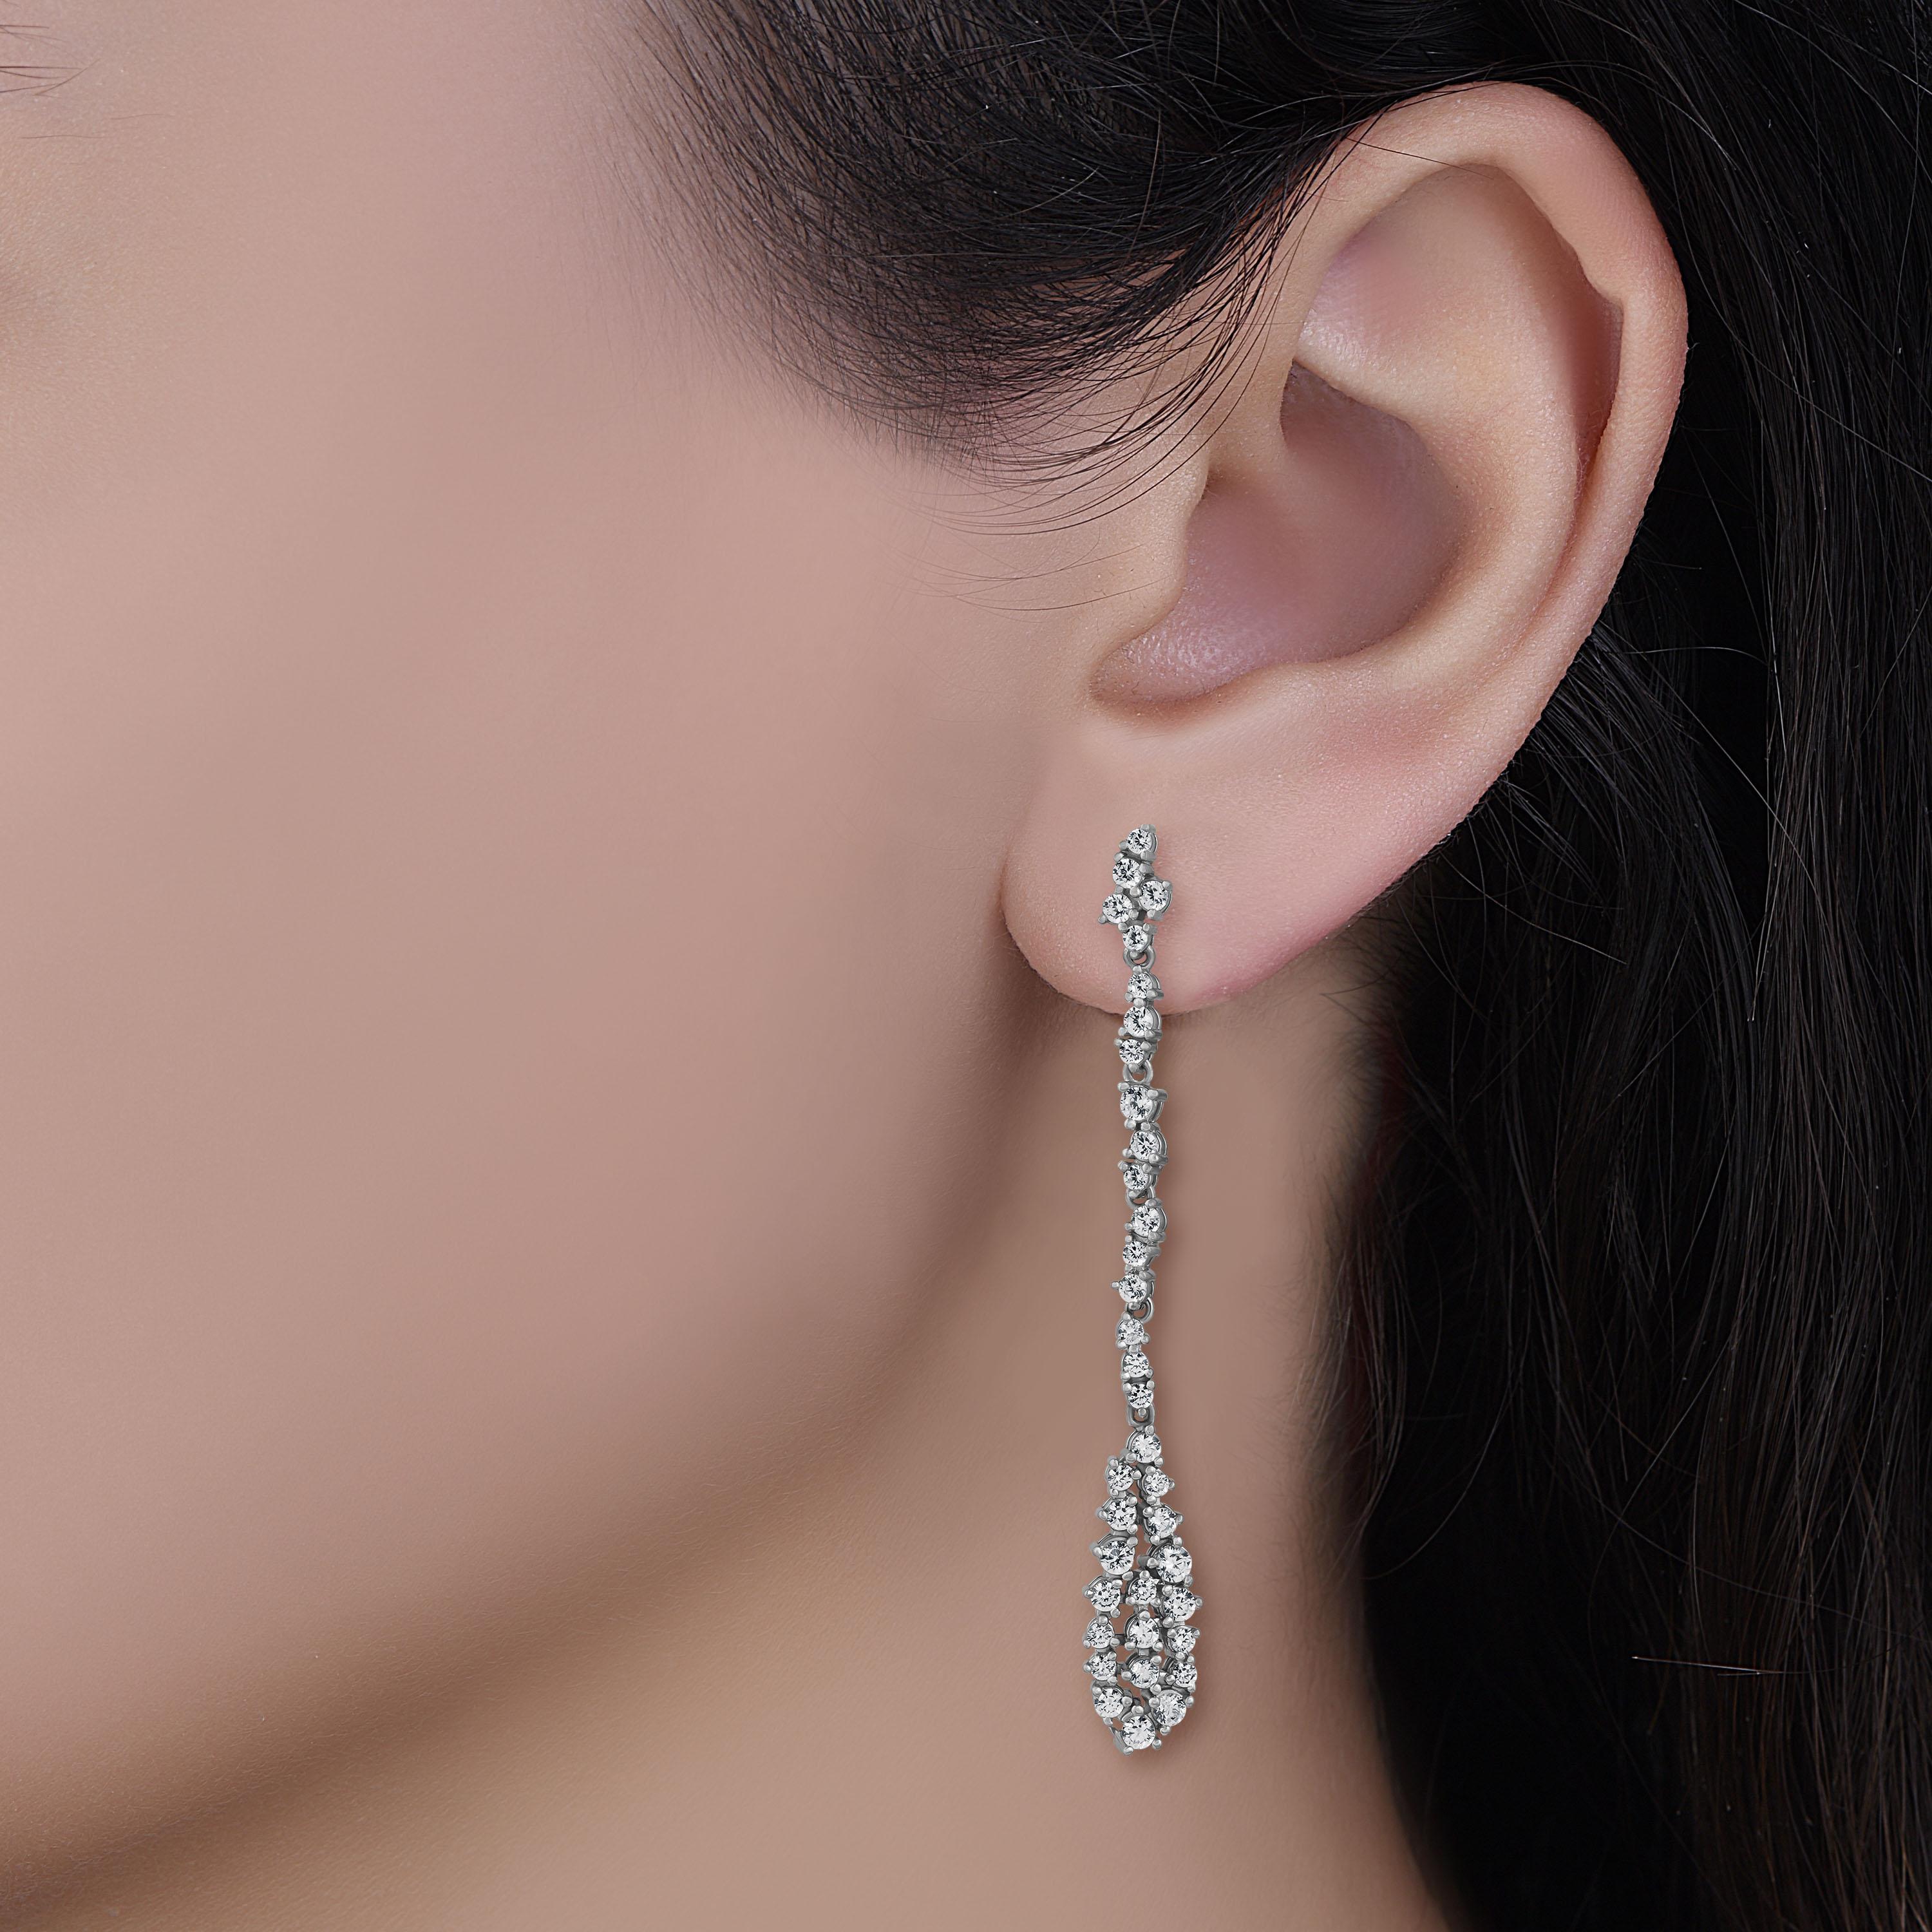 Made in the Emilio Jewelry factory. Earrings Feature approximately 2.70 carats total set in 18k white gold. Available to order in yellow or rose gold. 

